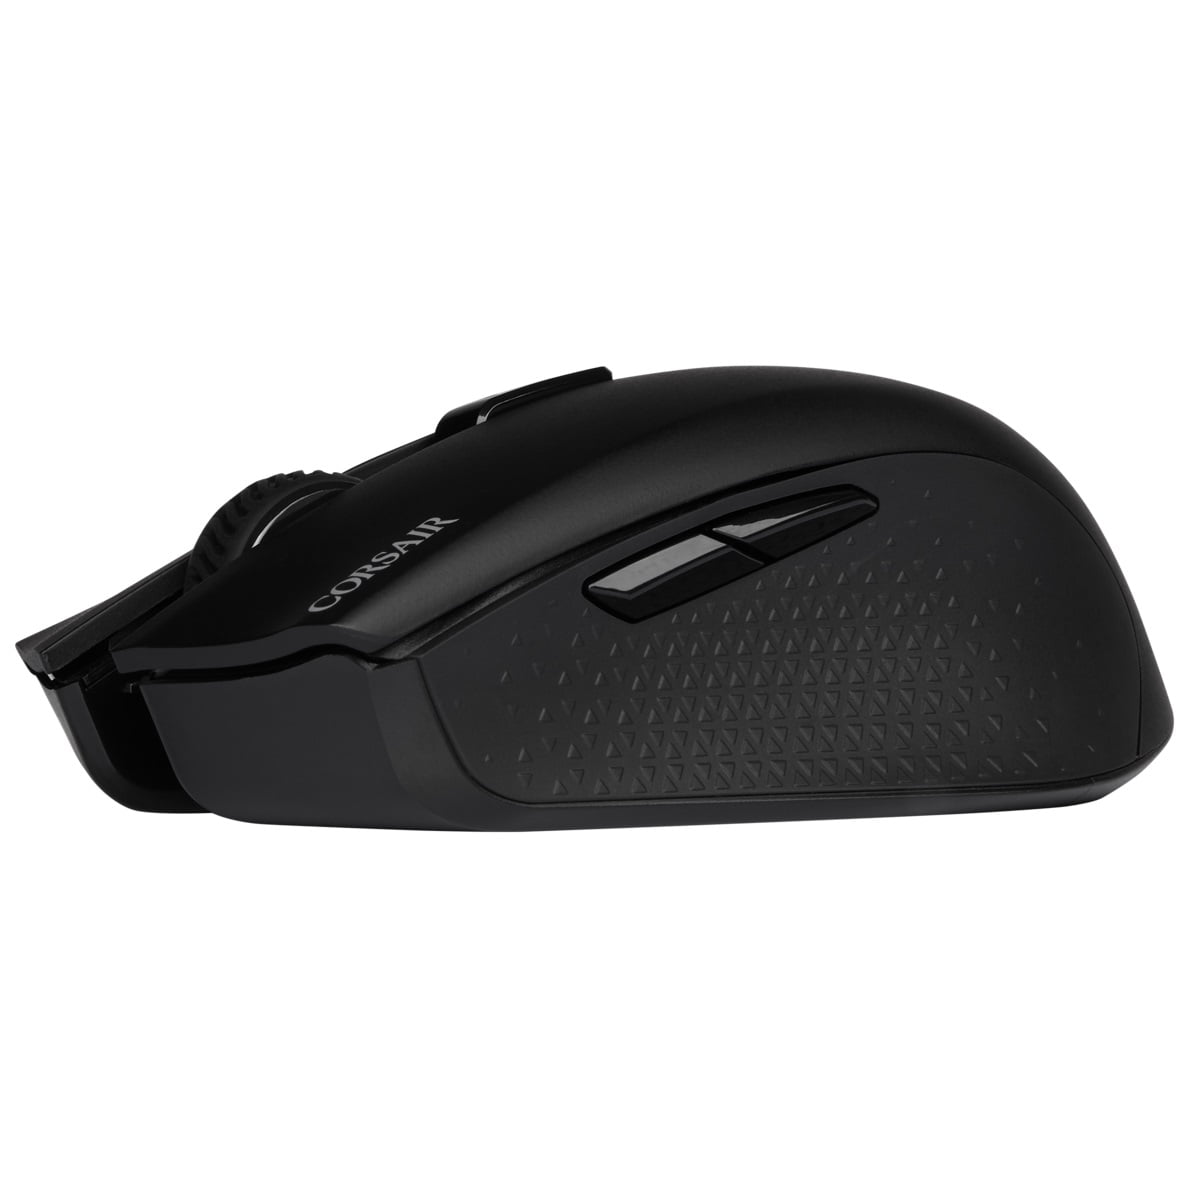 CORSAIR Harpoon RGB Wireless - Wireless Rechargeable Gaming Mouse - 10,000 DPI Optical Sensor. SlipStream Bluetooth or USB Wired Connectivity. Win Without Wires! - Walmart.com